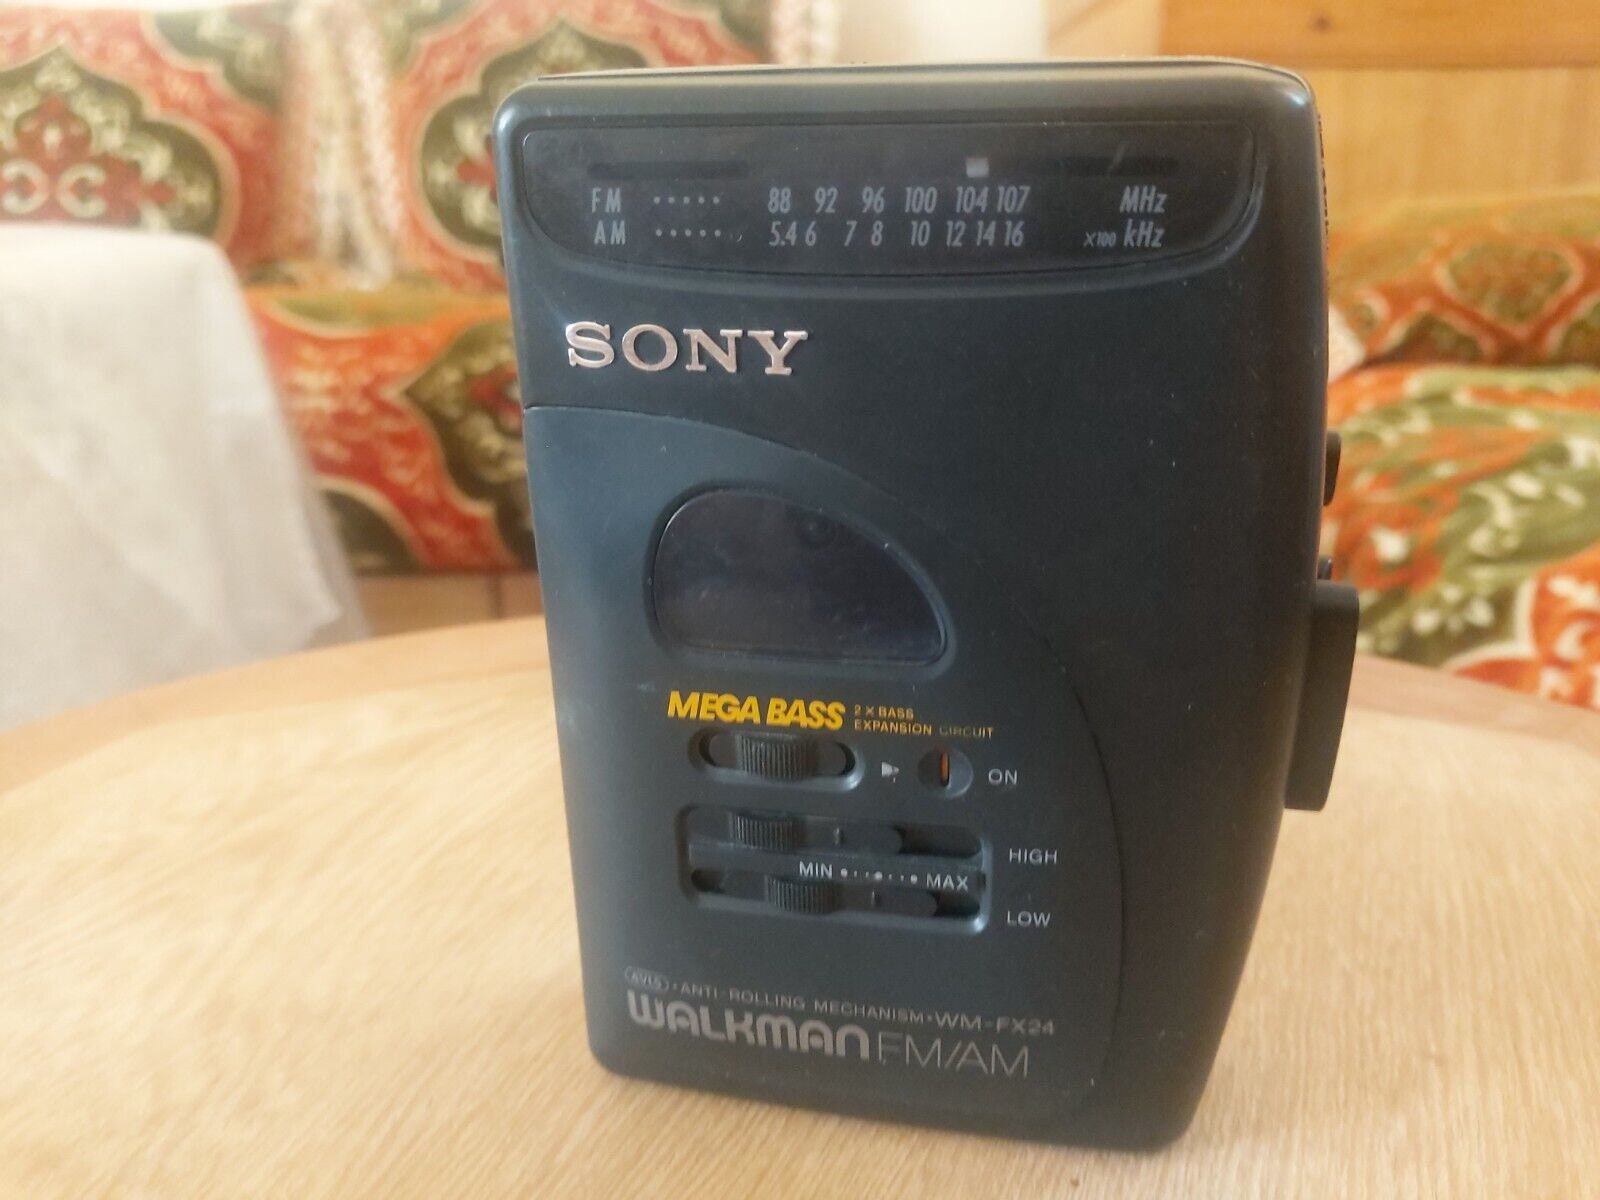 Vintage Sony Walkman Cassette Player Works Great, AM/FM Band Radio, Rare  and Collectible Model, Fully Working, Model WM-FX241 